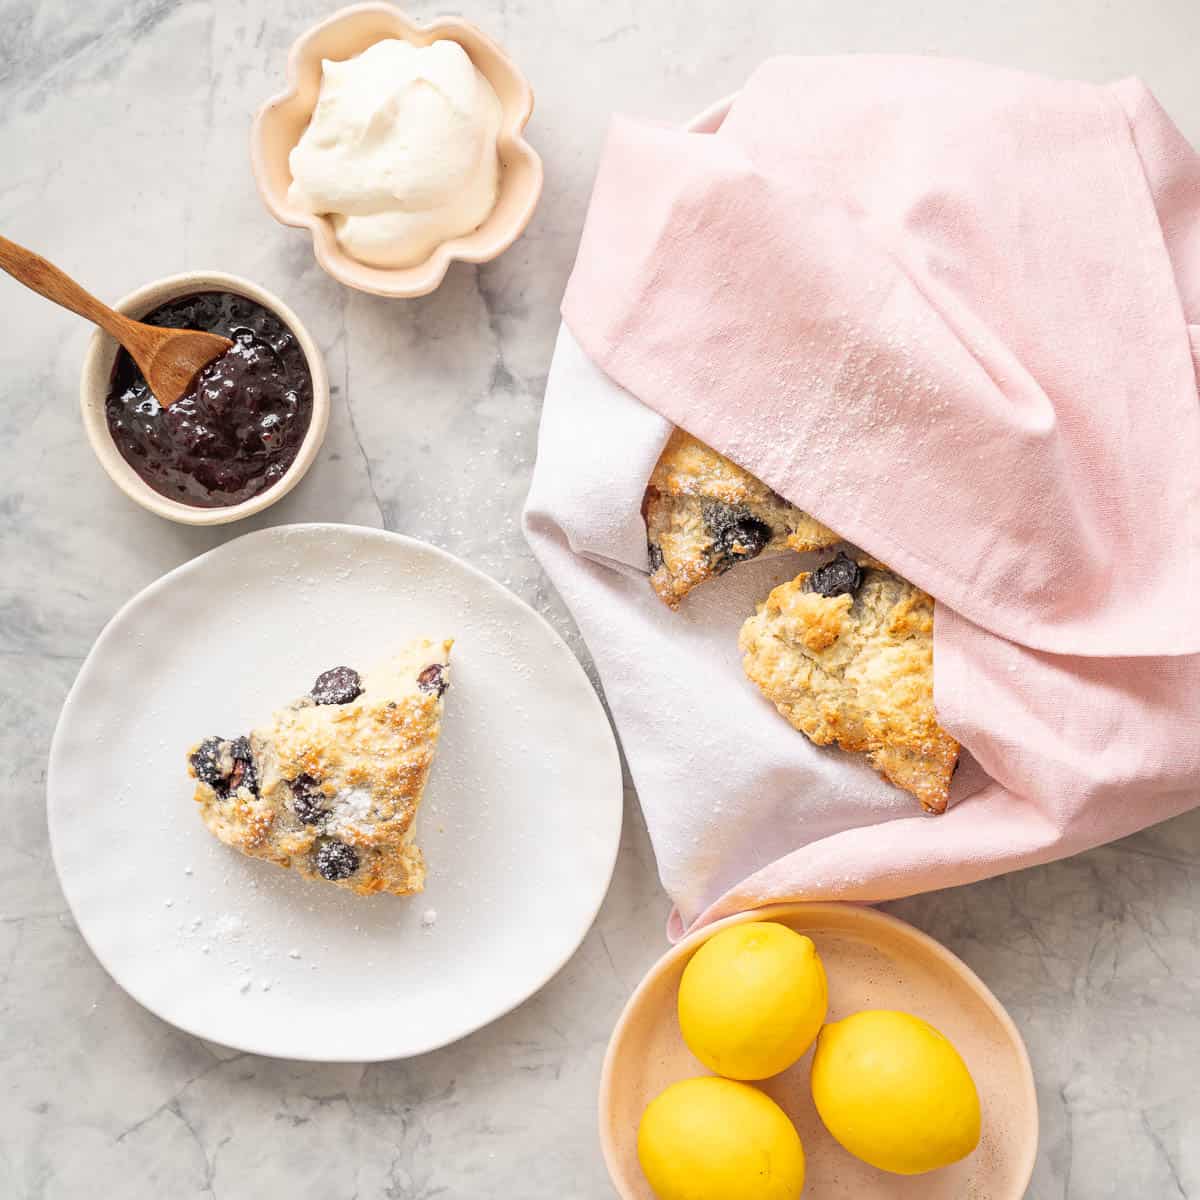 One baked blueberry scone resting on a plate next to the remainder of the batch of scones which is resting in a soft pink tea towel and one ramekin filled with jam and another with whipped cream and a plate with three lemons 